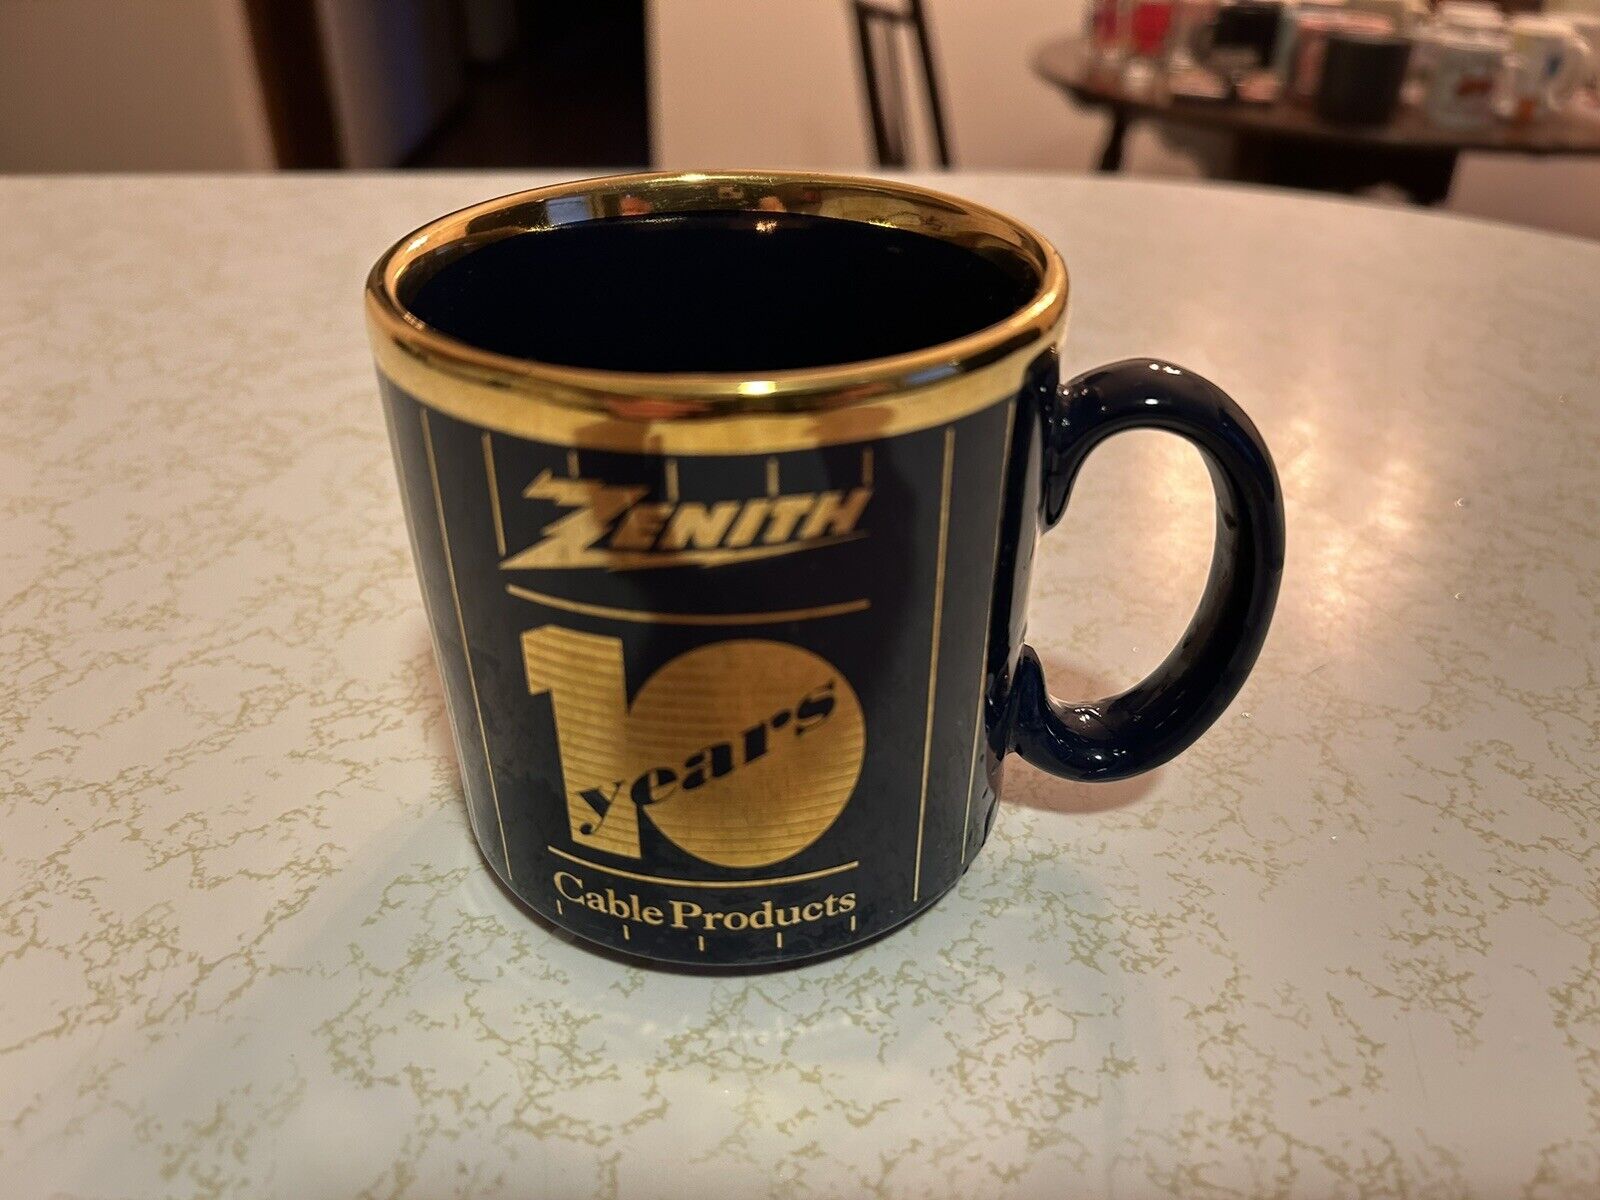 Vintage 1980's Zenith Cable Products Ceramic Coffee Mug, NOS, Blue Gold